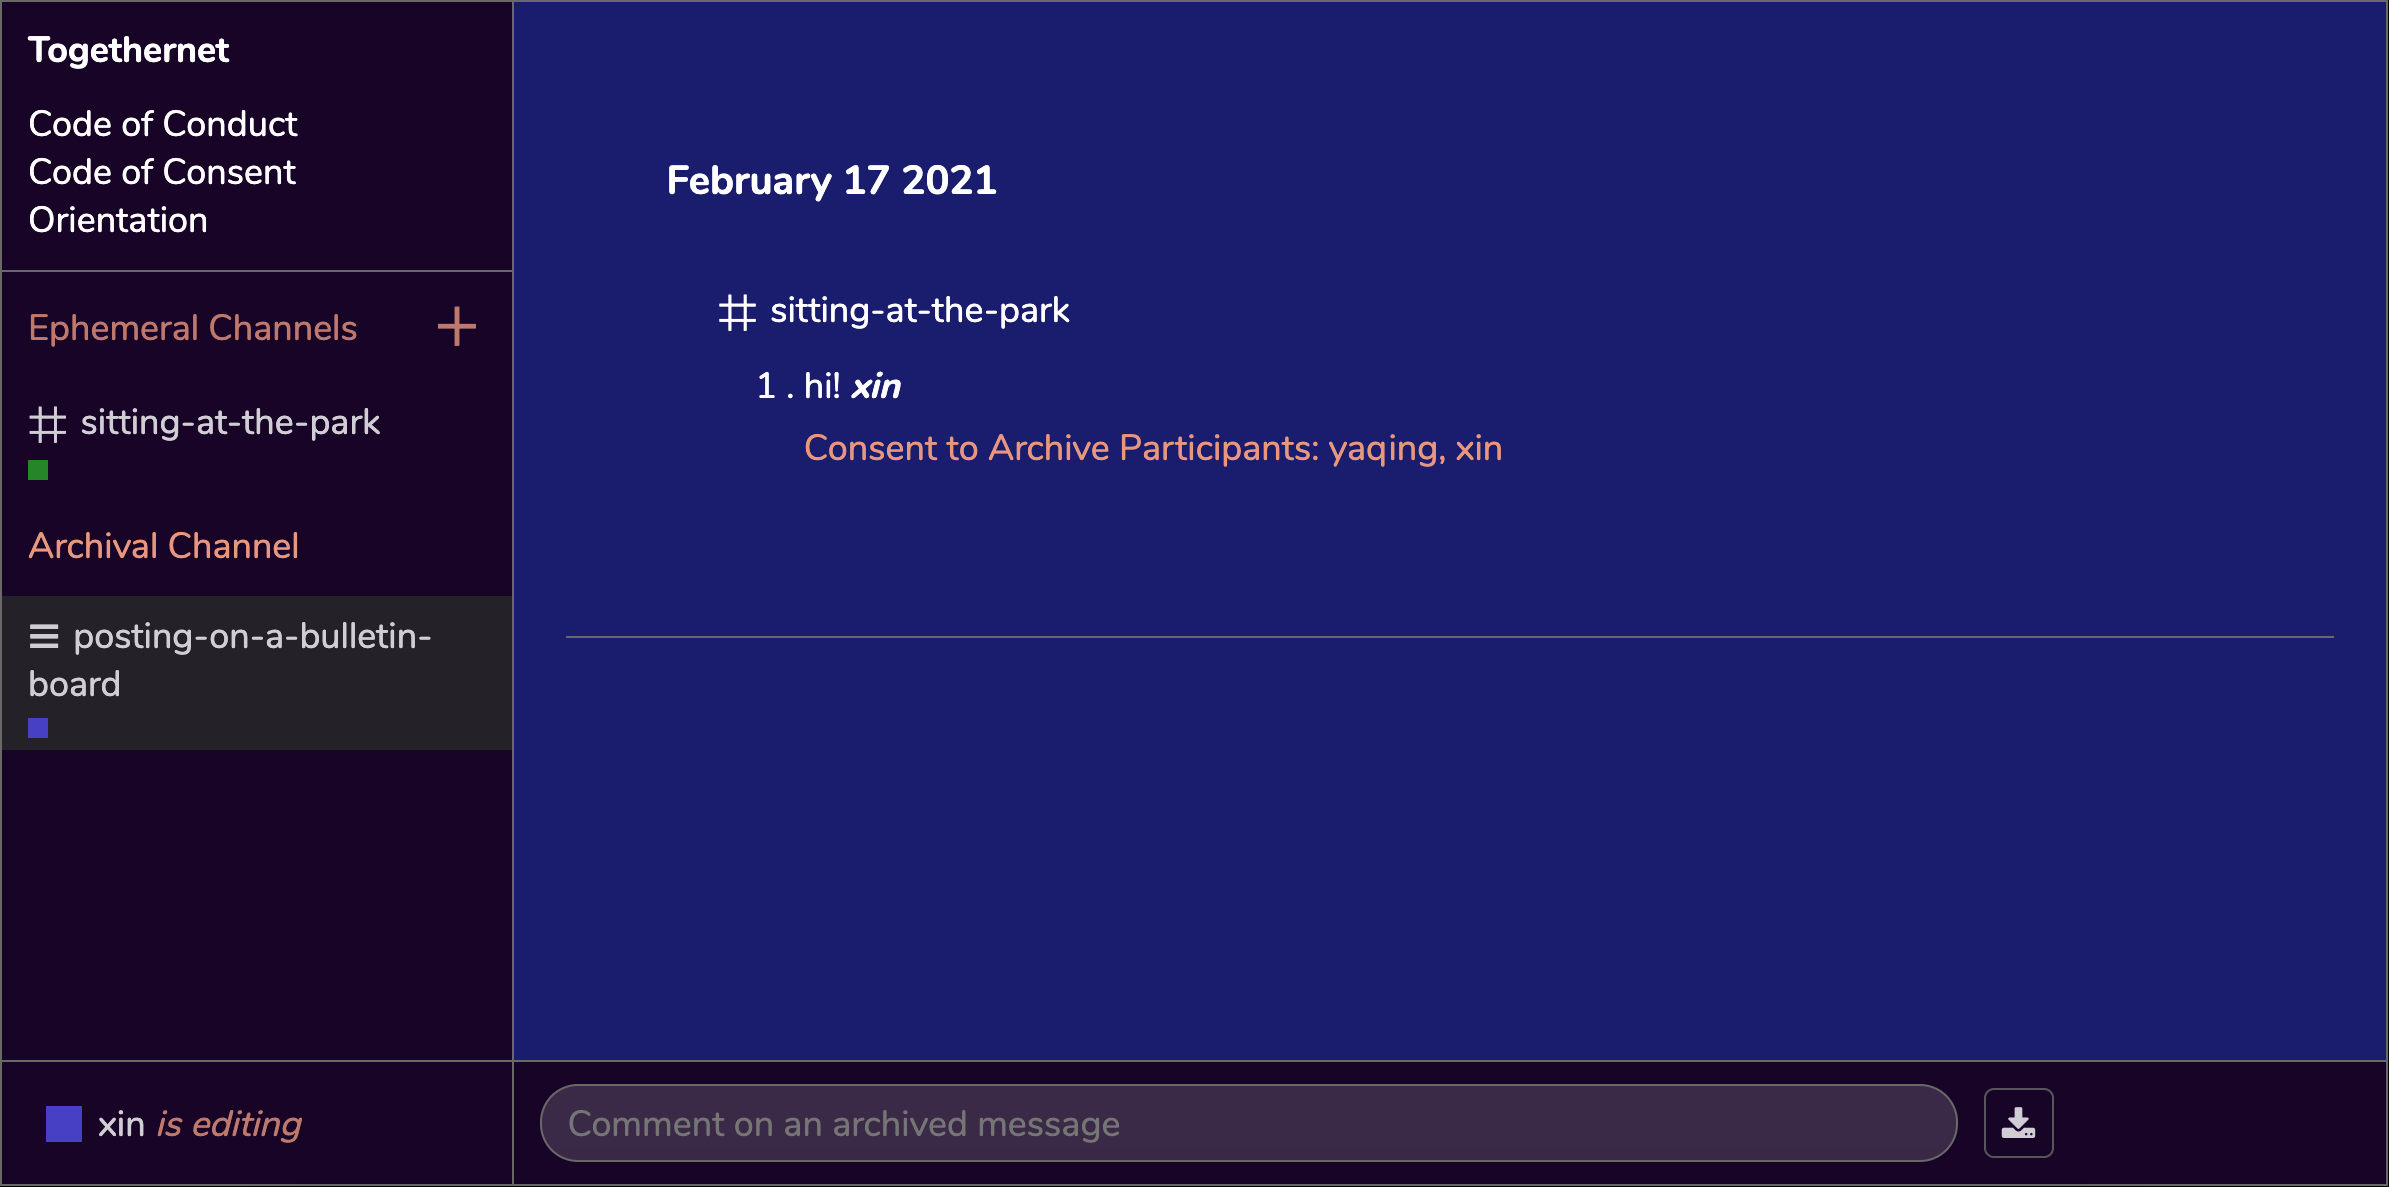 once the user enters the archival channel, the left-side panels of TogetherNet remain the same but the center navigation space is now replaced by the archive space, colored by a background as blue as the dark sky. Archived messages are displayed on the archived interface in white-colored fonts – 'February 17 2021, #sitting-at-the-park, 1. hi! written by xin, consent to archive participants: Yaqing, Xin'. On the bottom of the interface, there is a text input field that allows the user to comment on an archived message. On the right side of the input field there is a download icon to save the archive to the computer.